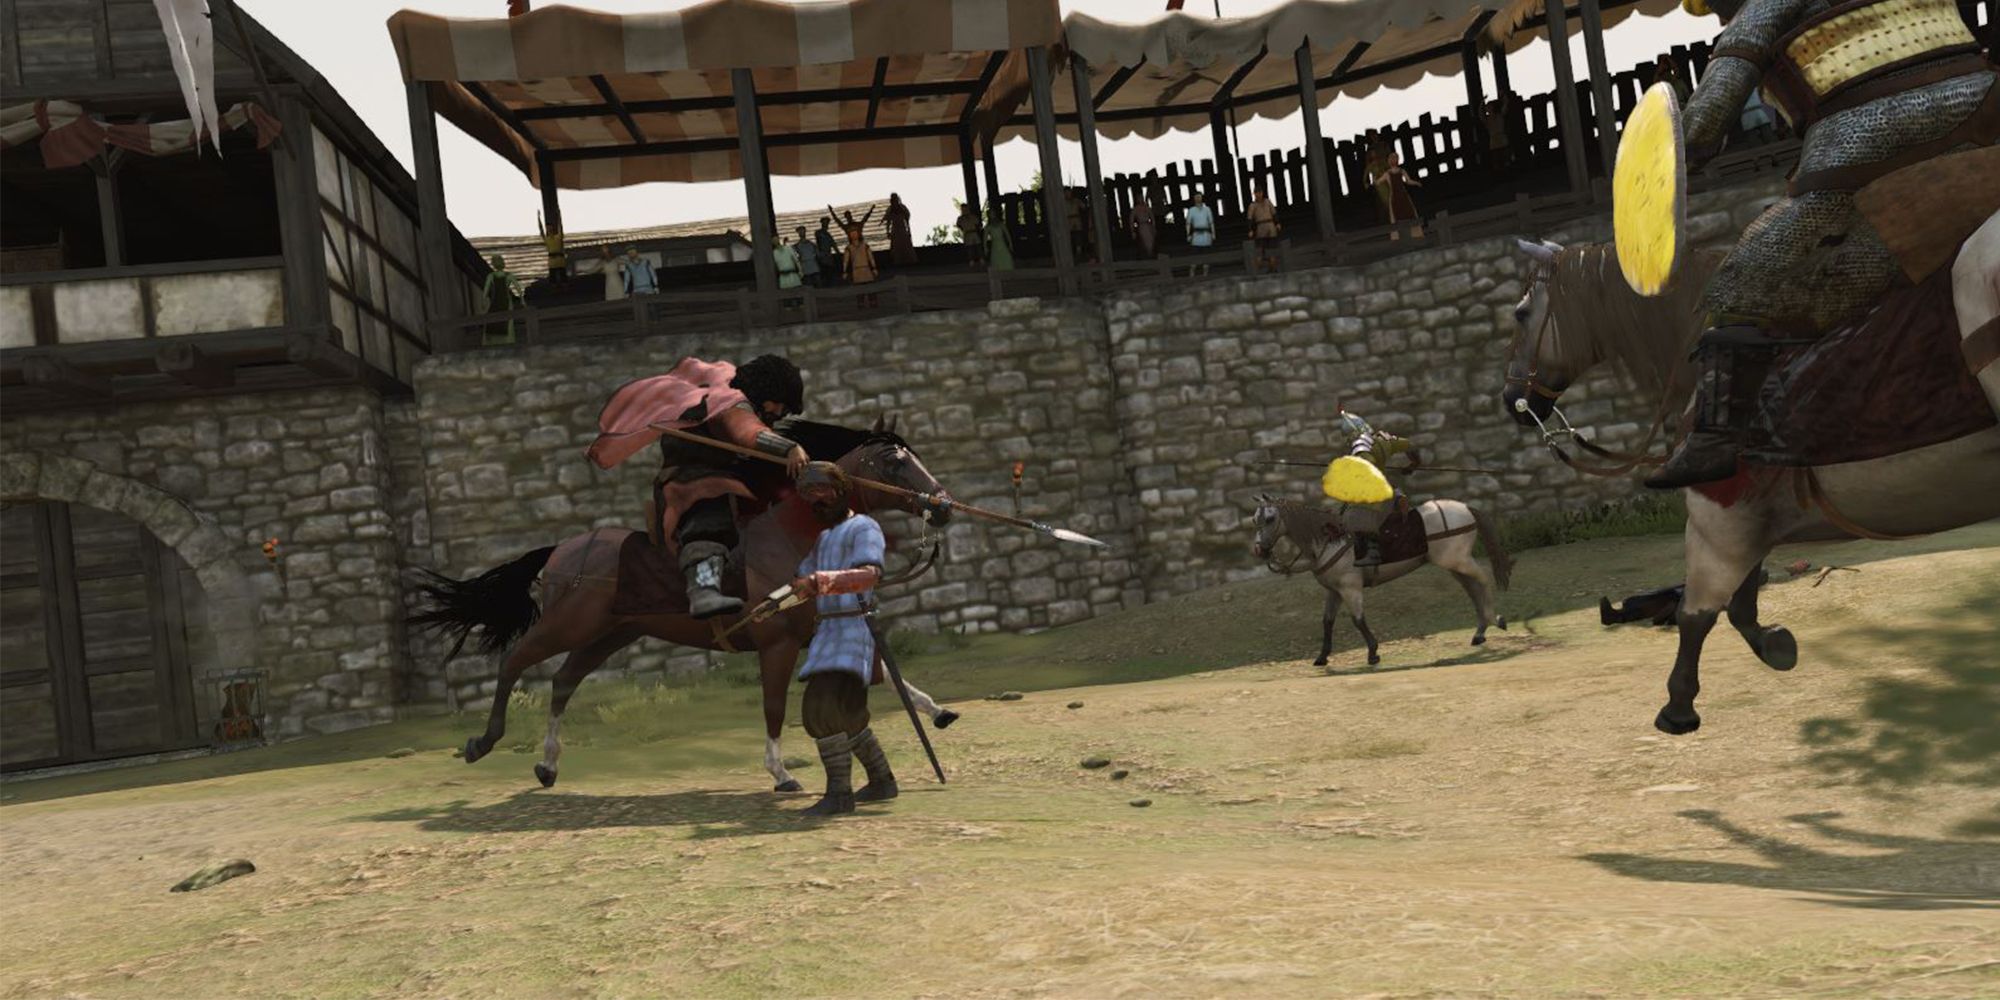 Multiple combatants fighting in an arena